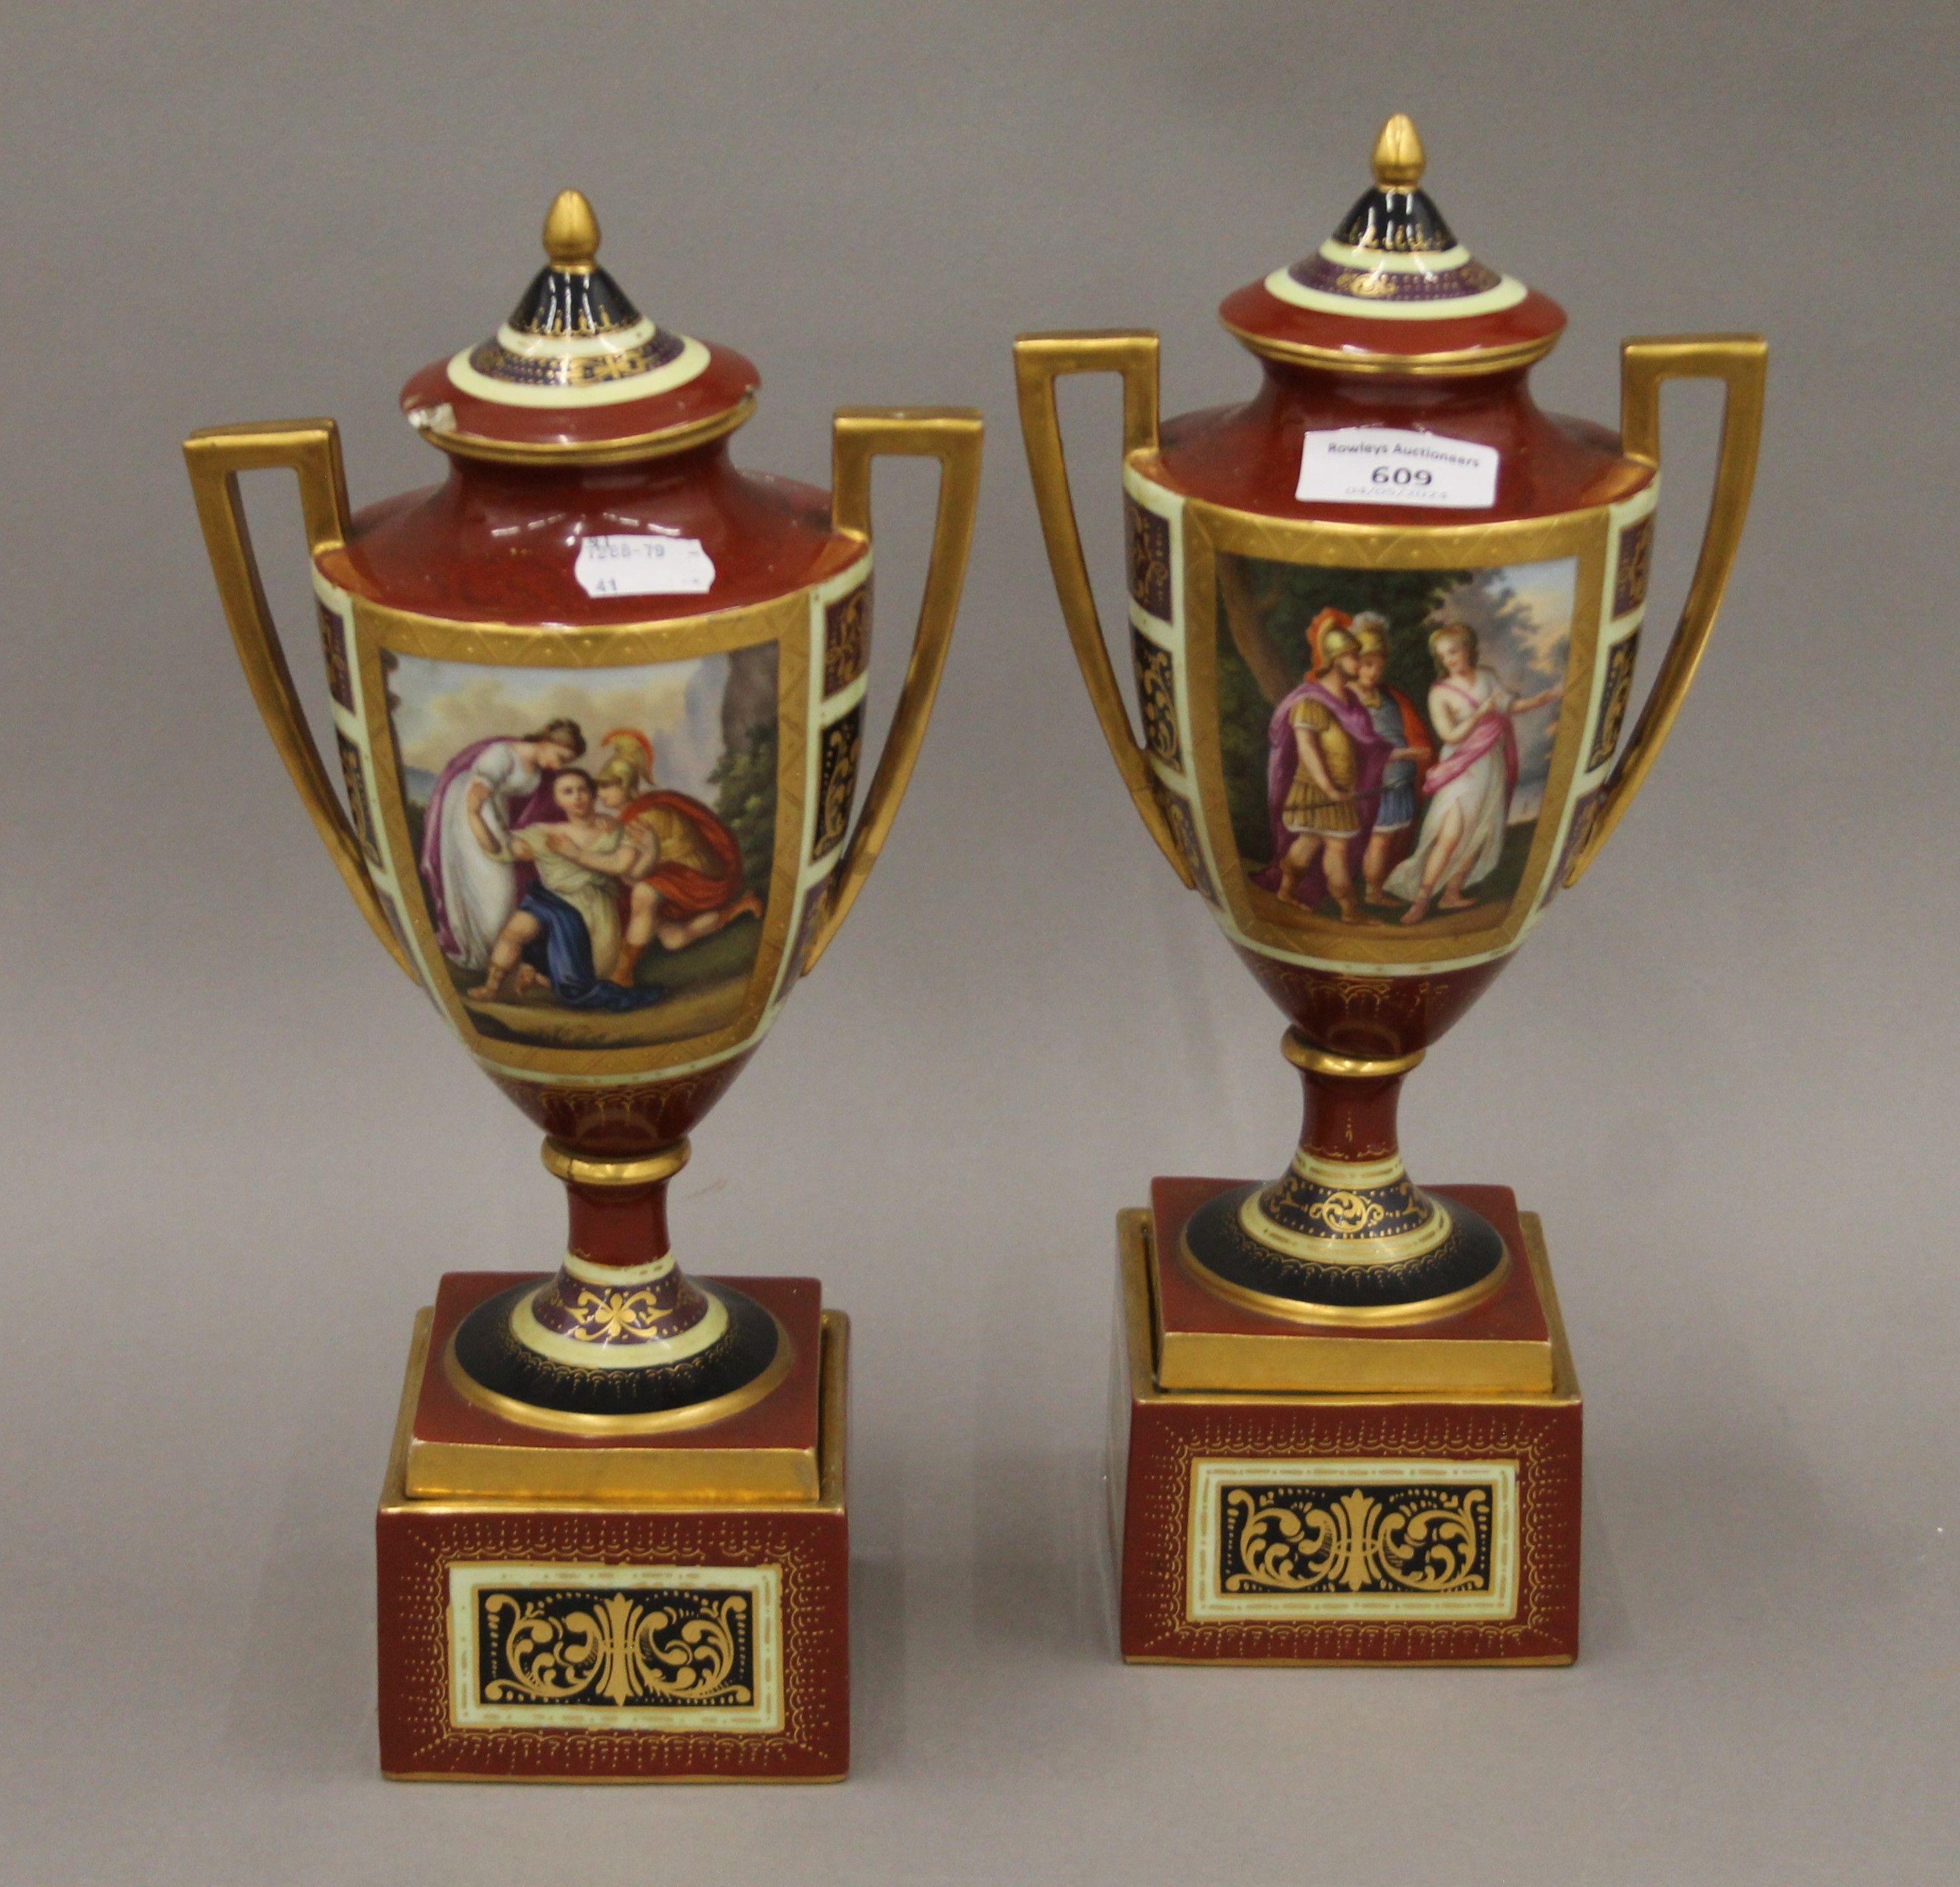 A pair of Vienna porcelain lidded vases on stands. 32 cm high.